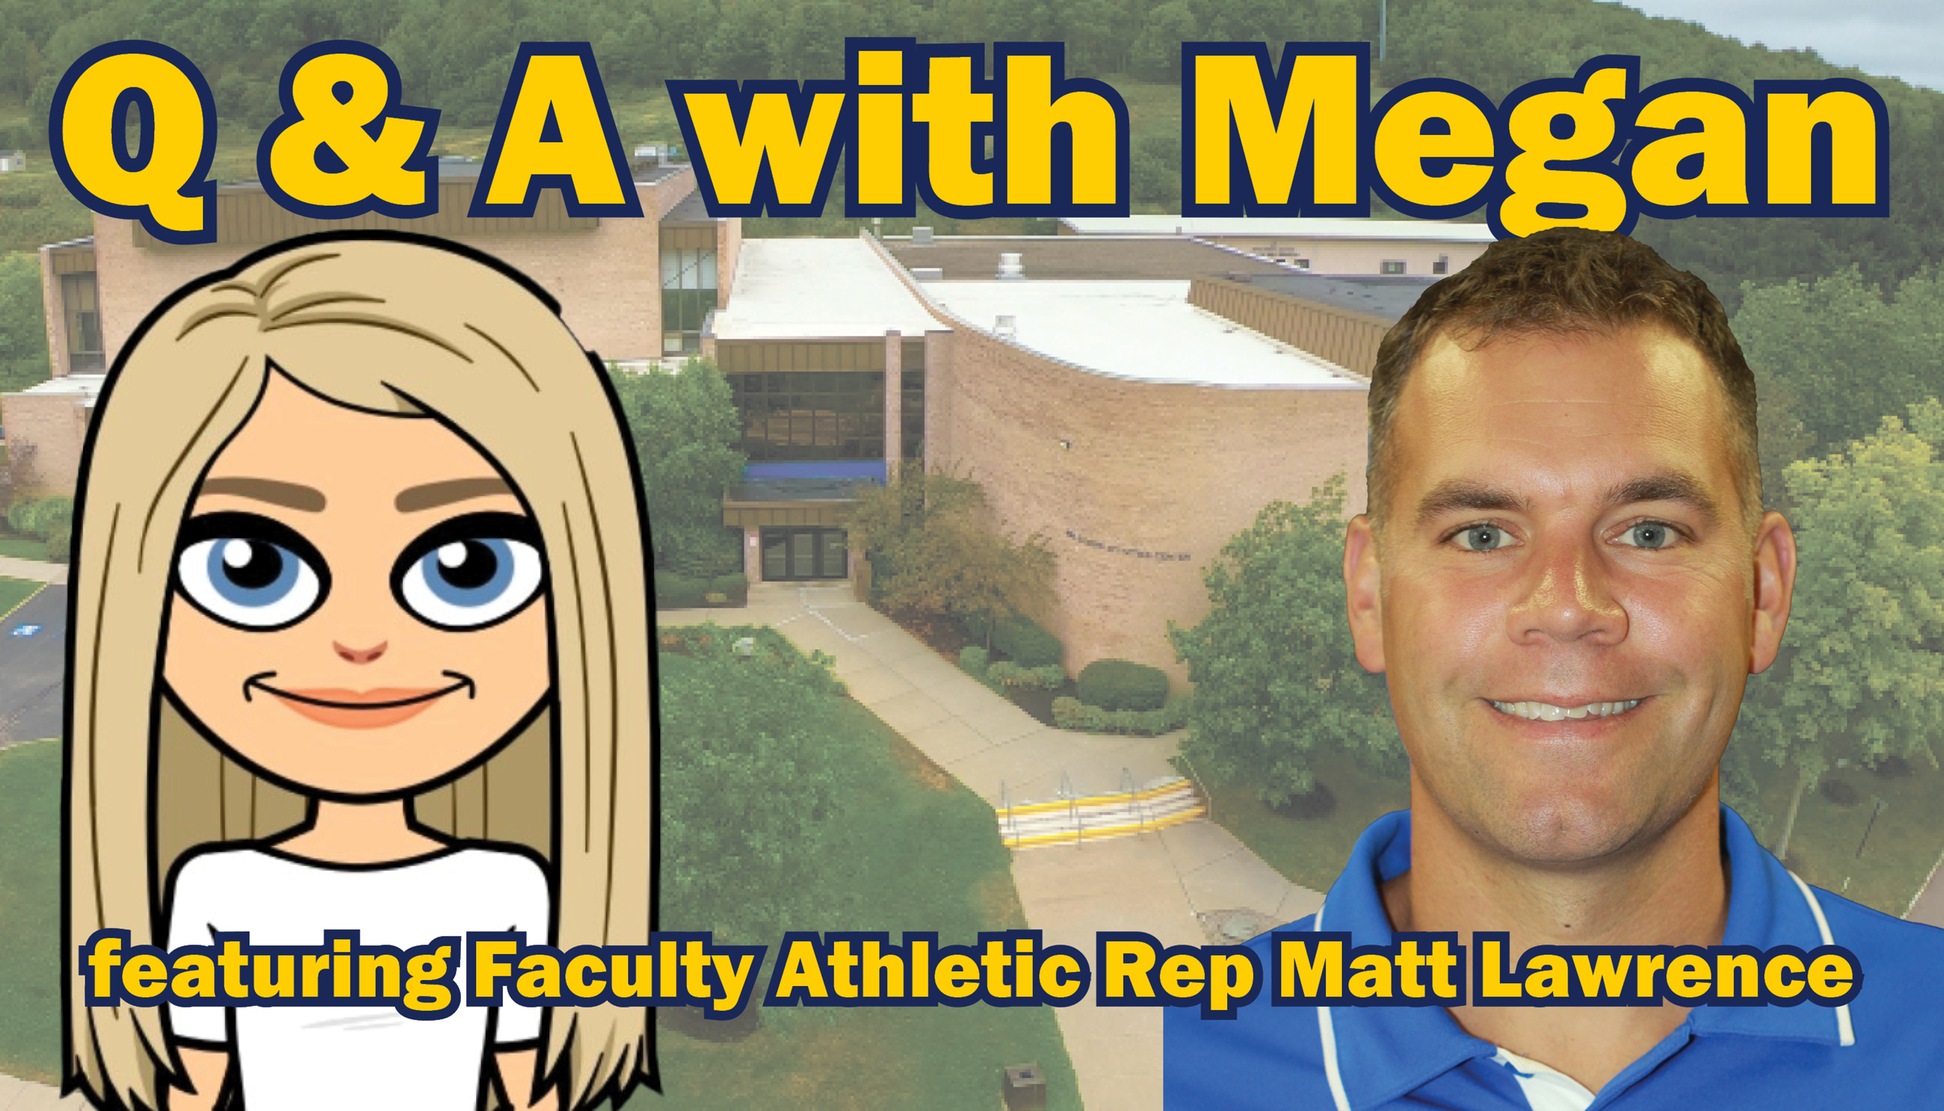 Q&A with Megan featuring Faculty Athletic Rep Matt Lawrence.